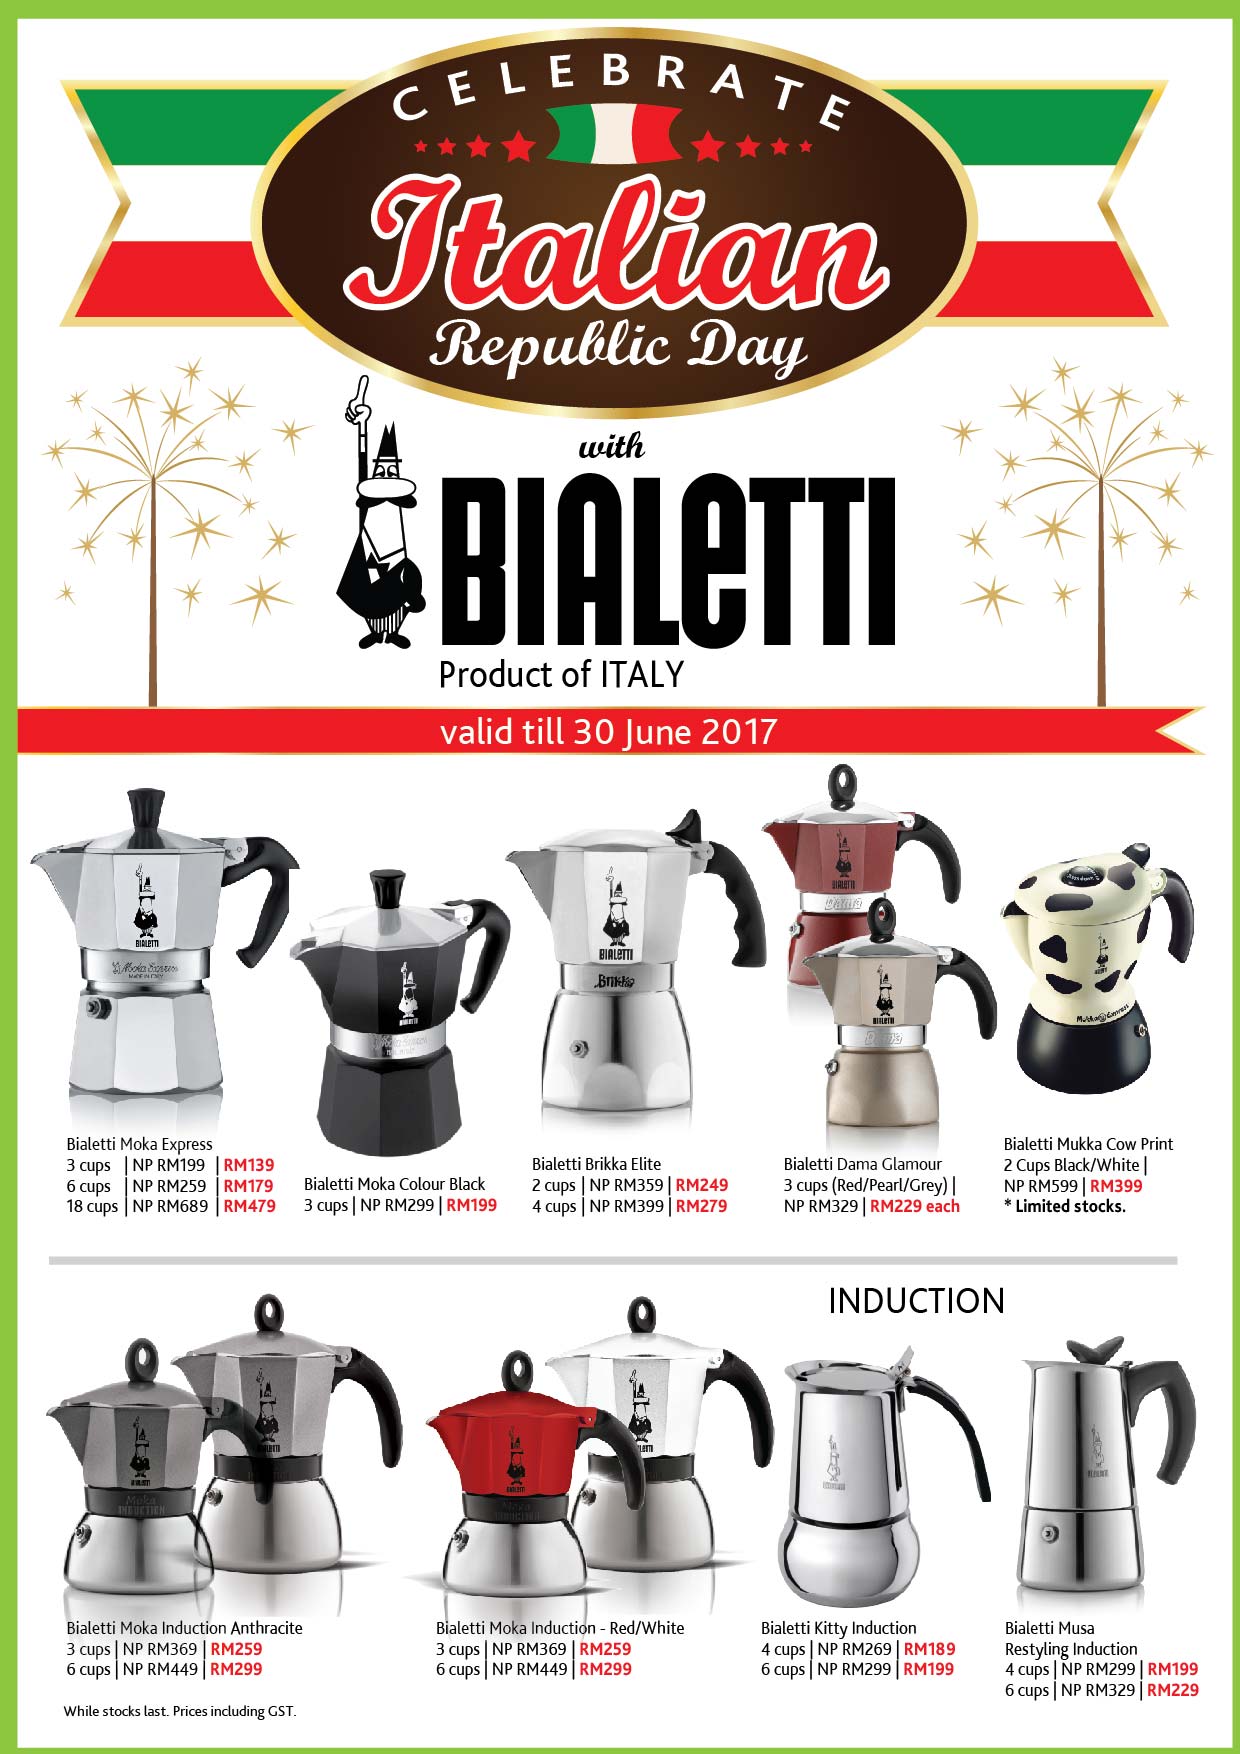 Bialetti Mini Express Induction Black 2 Cup Set - Chef's Complements